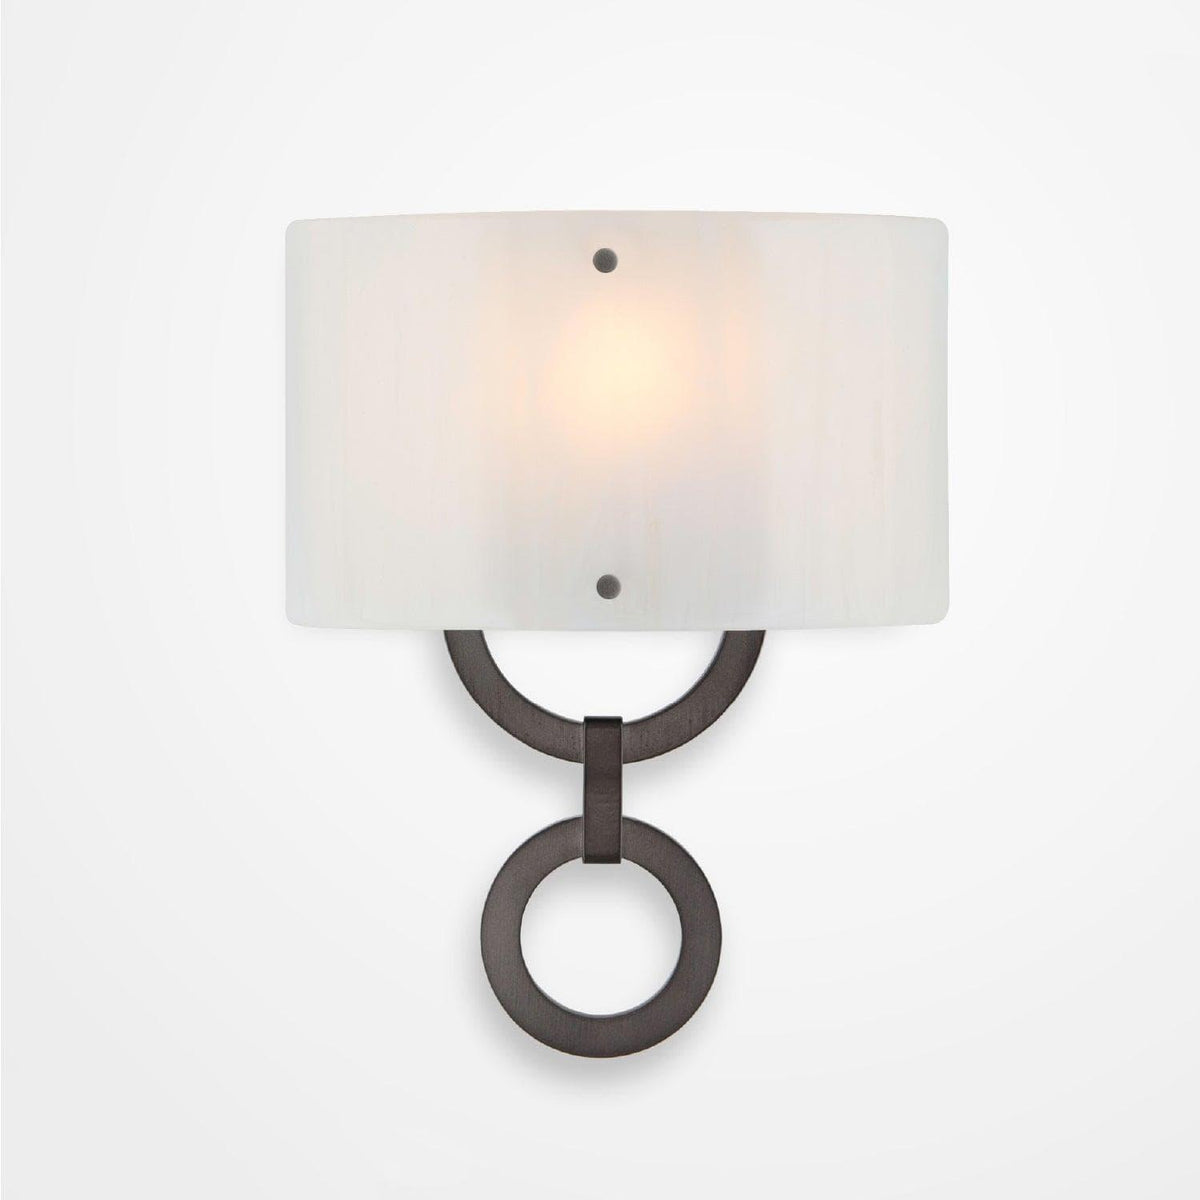 Hammerton Studio - Carlyle Round Link Cover Sconce - CSB0033-0D-GM-IW-E2 | Montreal Lighting & Hardware